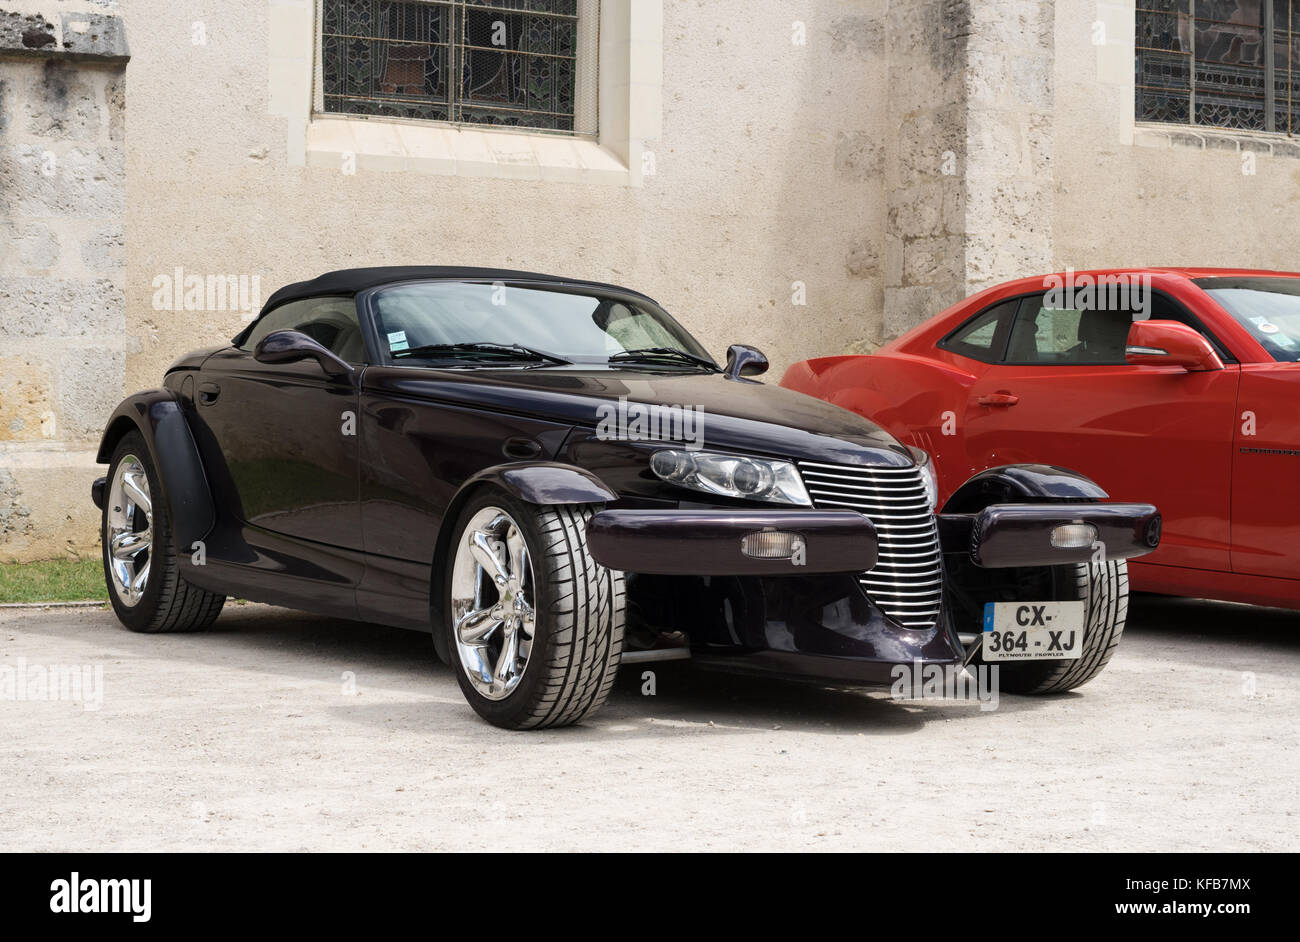 Plymouth Prowler car by DaimlerChrysler, outside a church in France, Europe Stock Photo